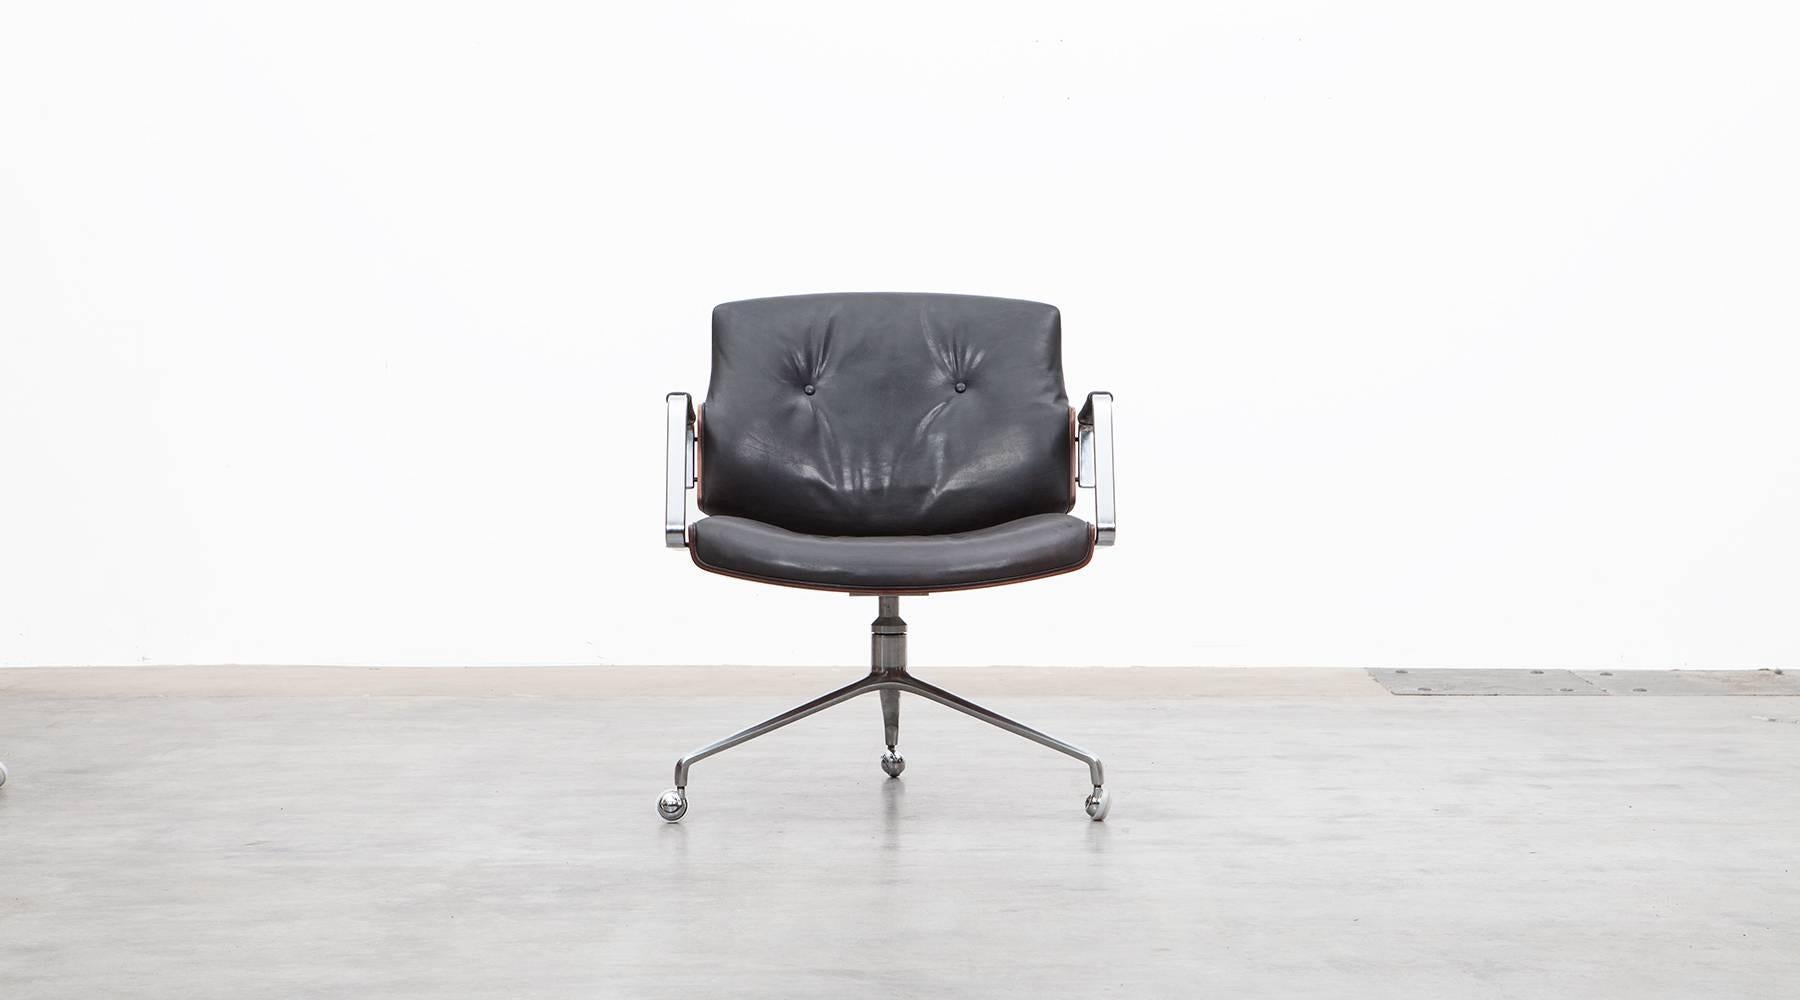 Classical swivel chairs designed by Preben Fabricius and Jørgen Kastholm. The chair has a brushed steel tripod foot, high quality leather upholstery and two curved wooden shells. This model has slight signs of wear in the wood which are rewired, the